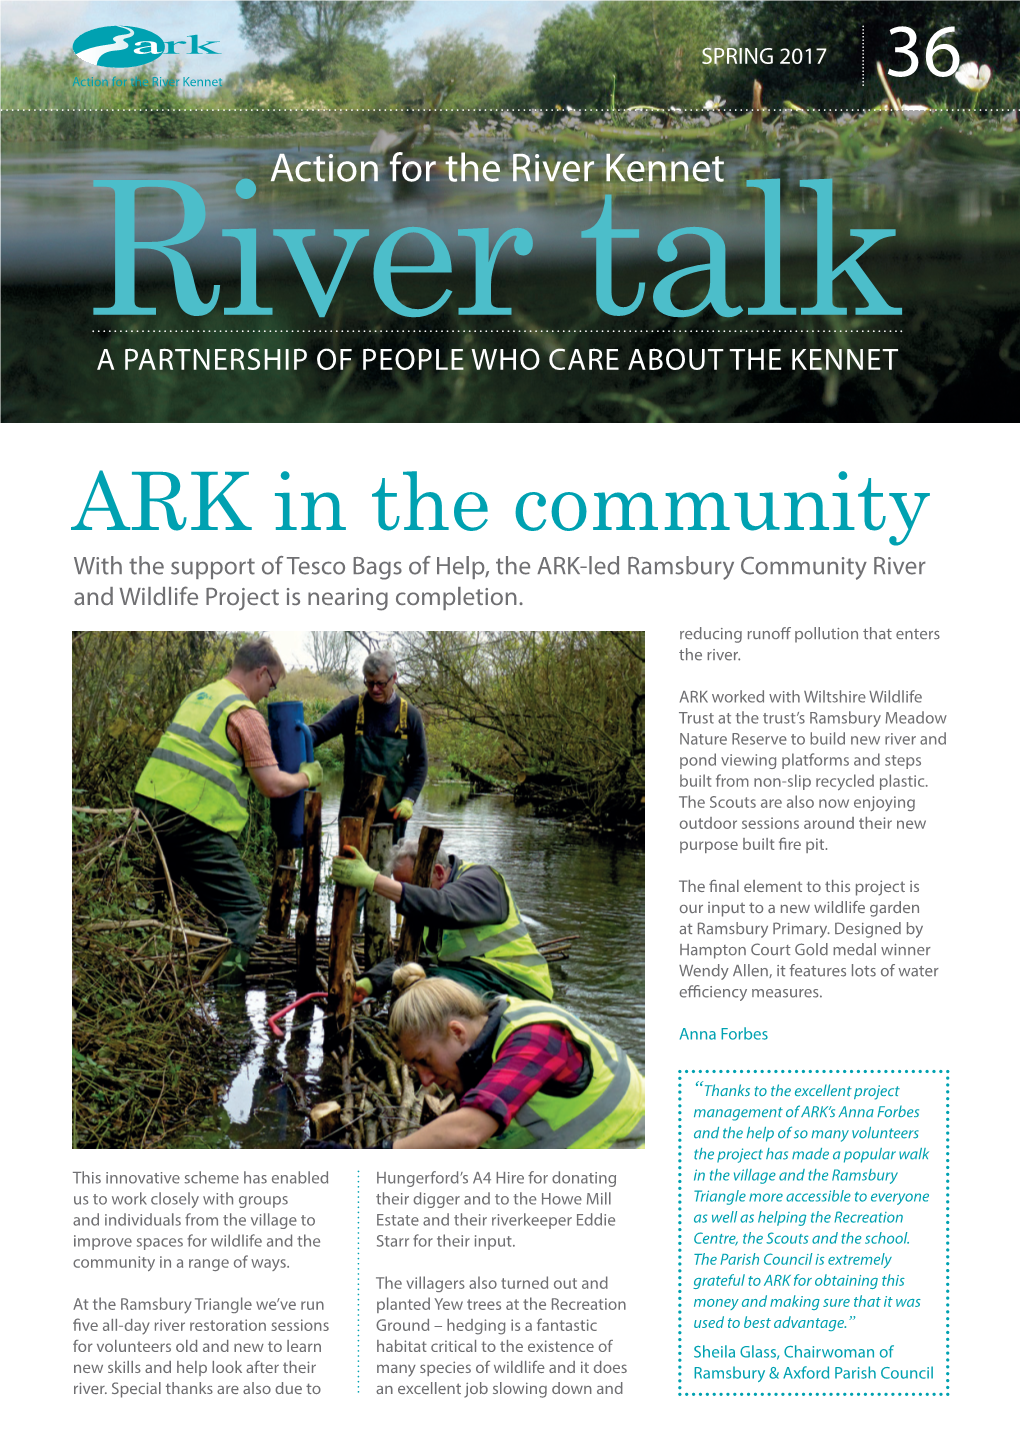 ARK in the Community with the Support of Tesco Bags of Help, the ARK-Led Ramsbury Community River and Wildlife Project Is Nearing Completion